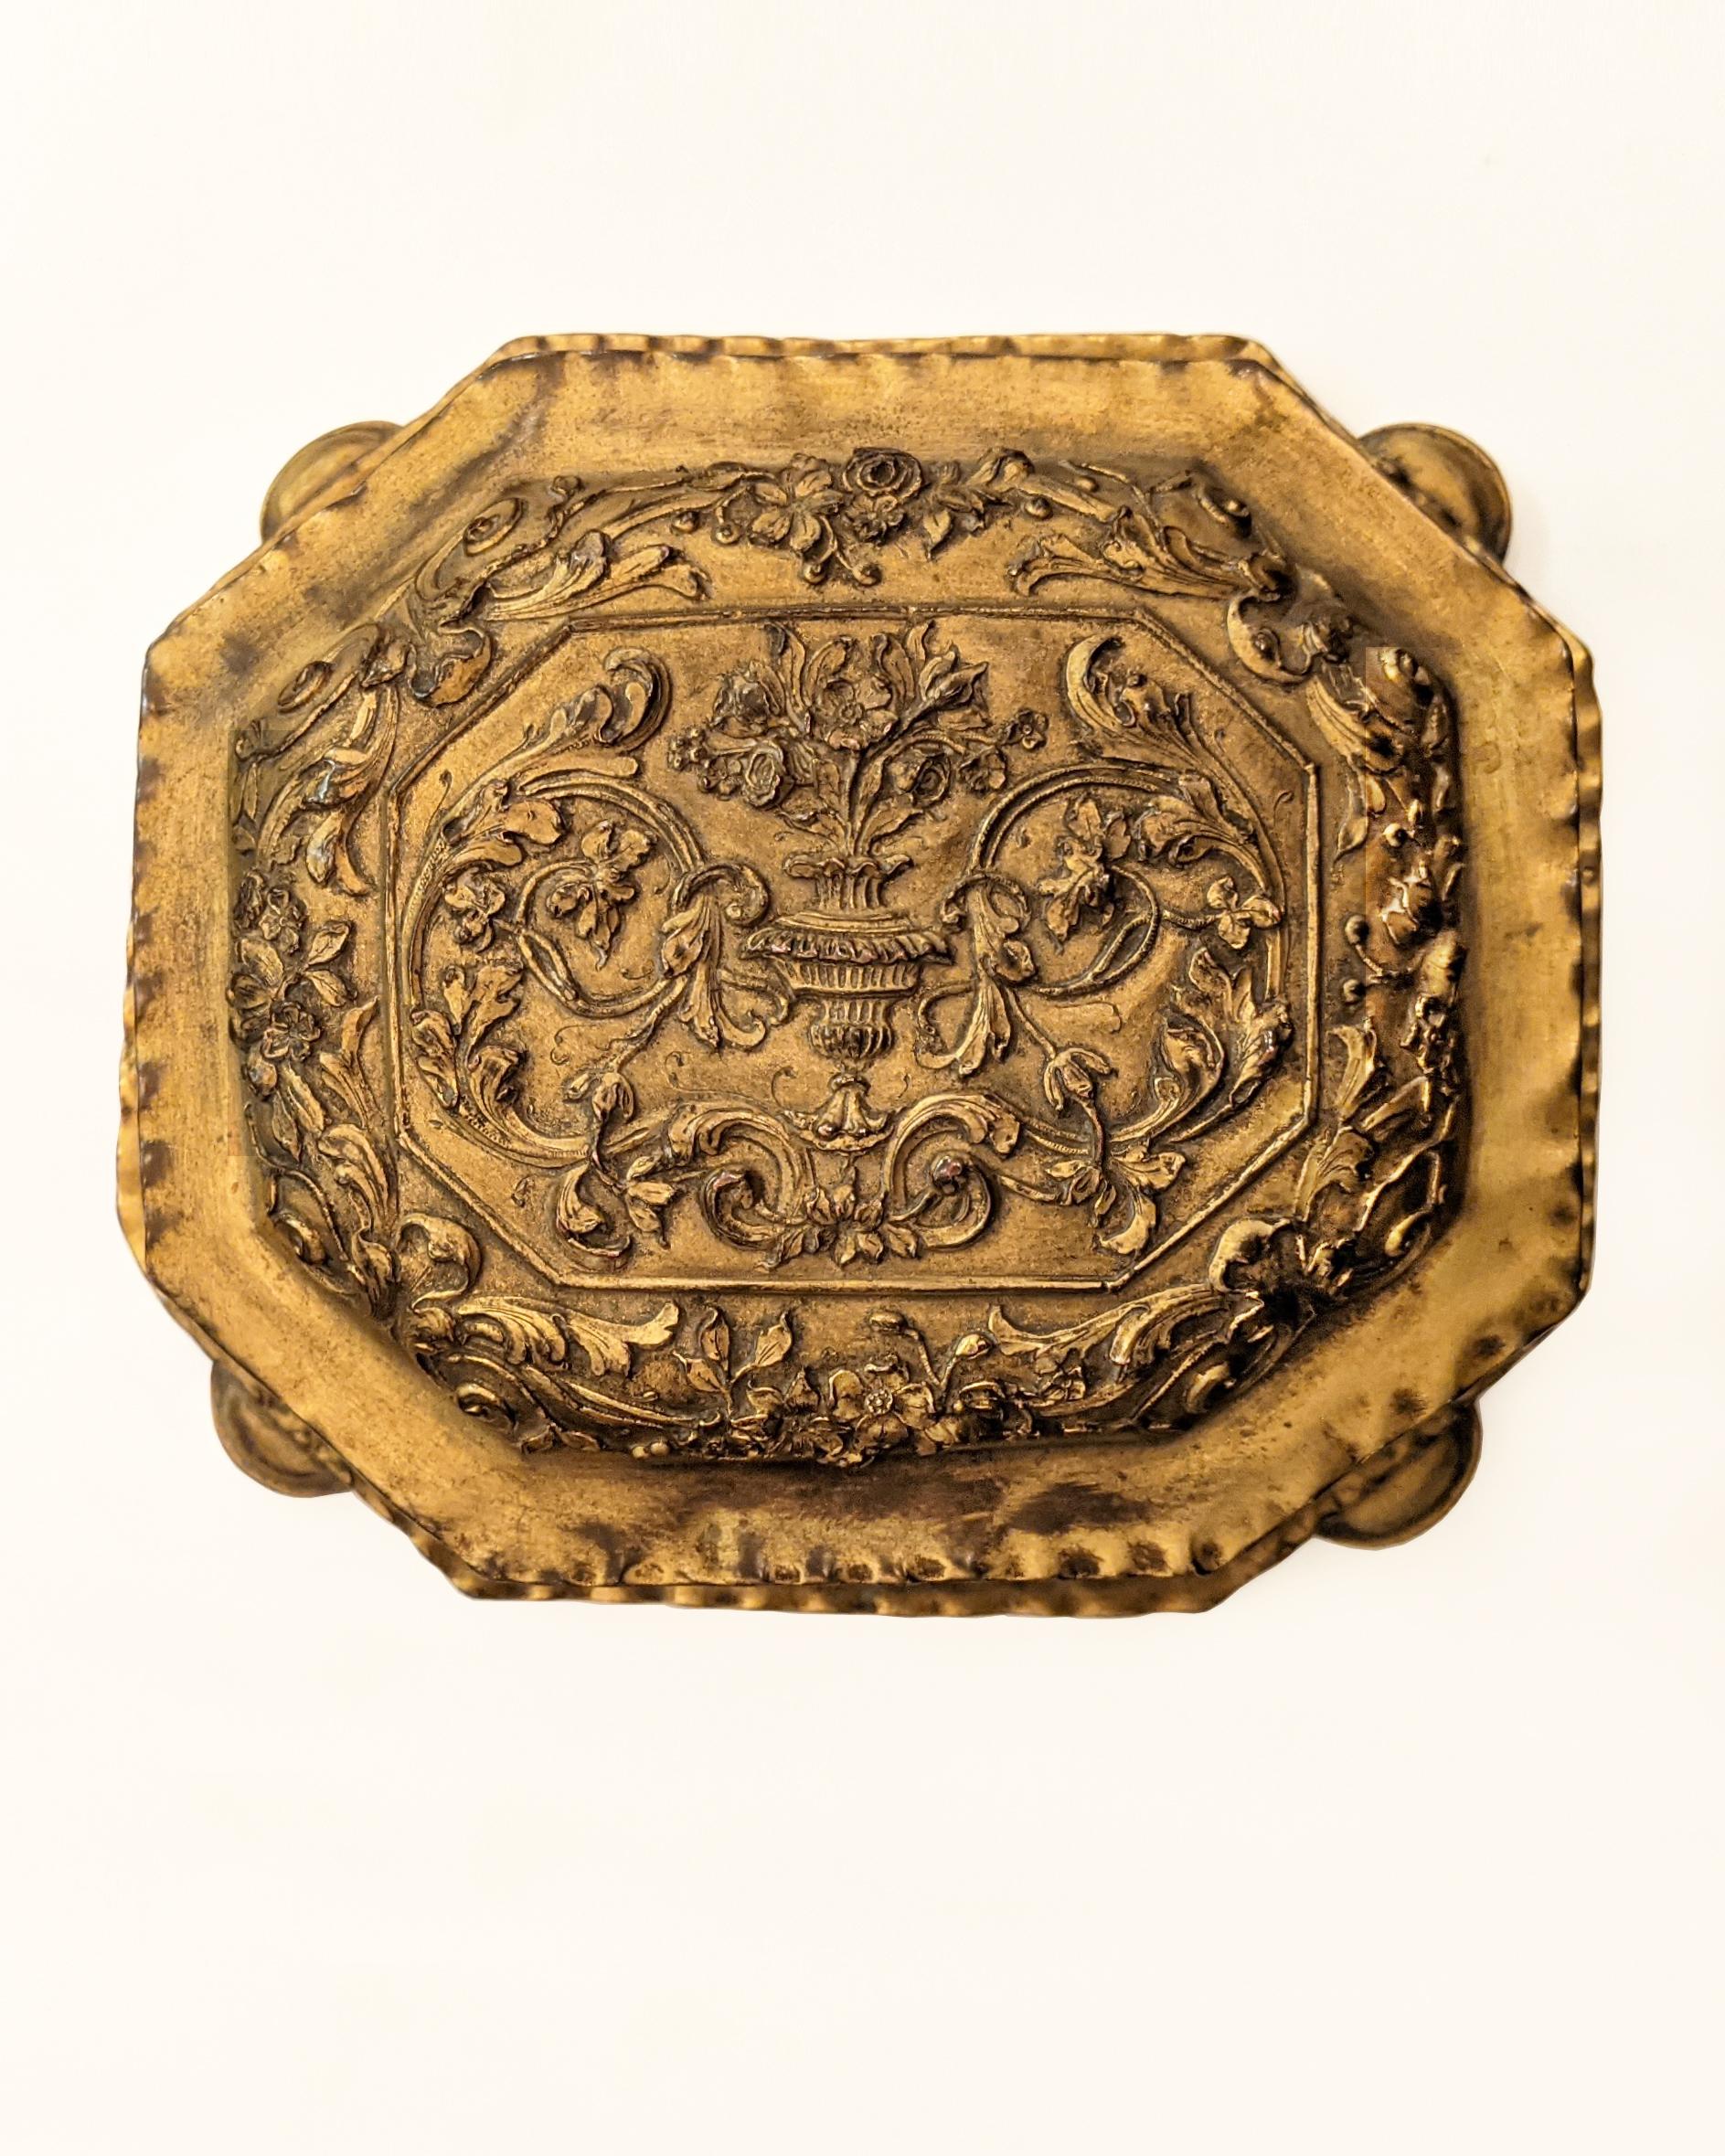 ATA1385

A gilt copper jewelry box lined in red velvet. Detailed throughout with a crisp foliate arabesque pattern. Signed on the lid by the New York maker E. F. Caldwell.

Overall: 3-1/2